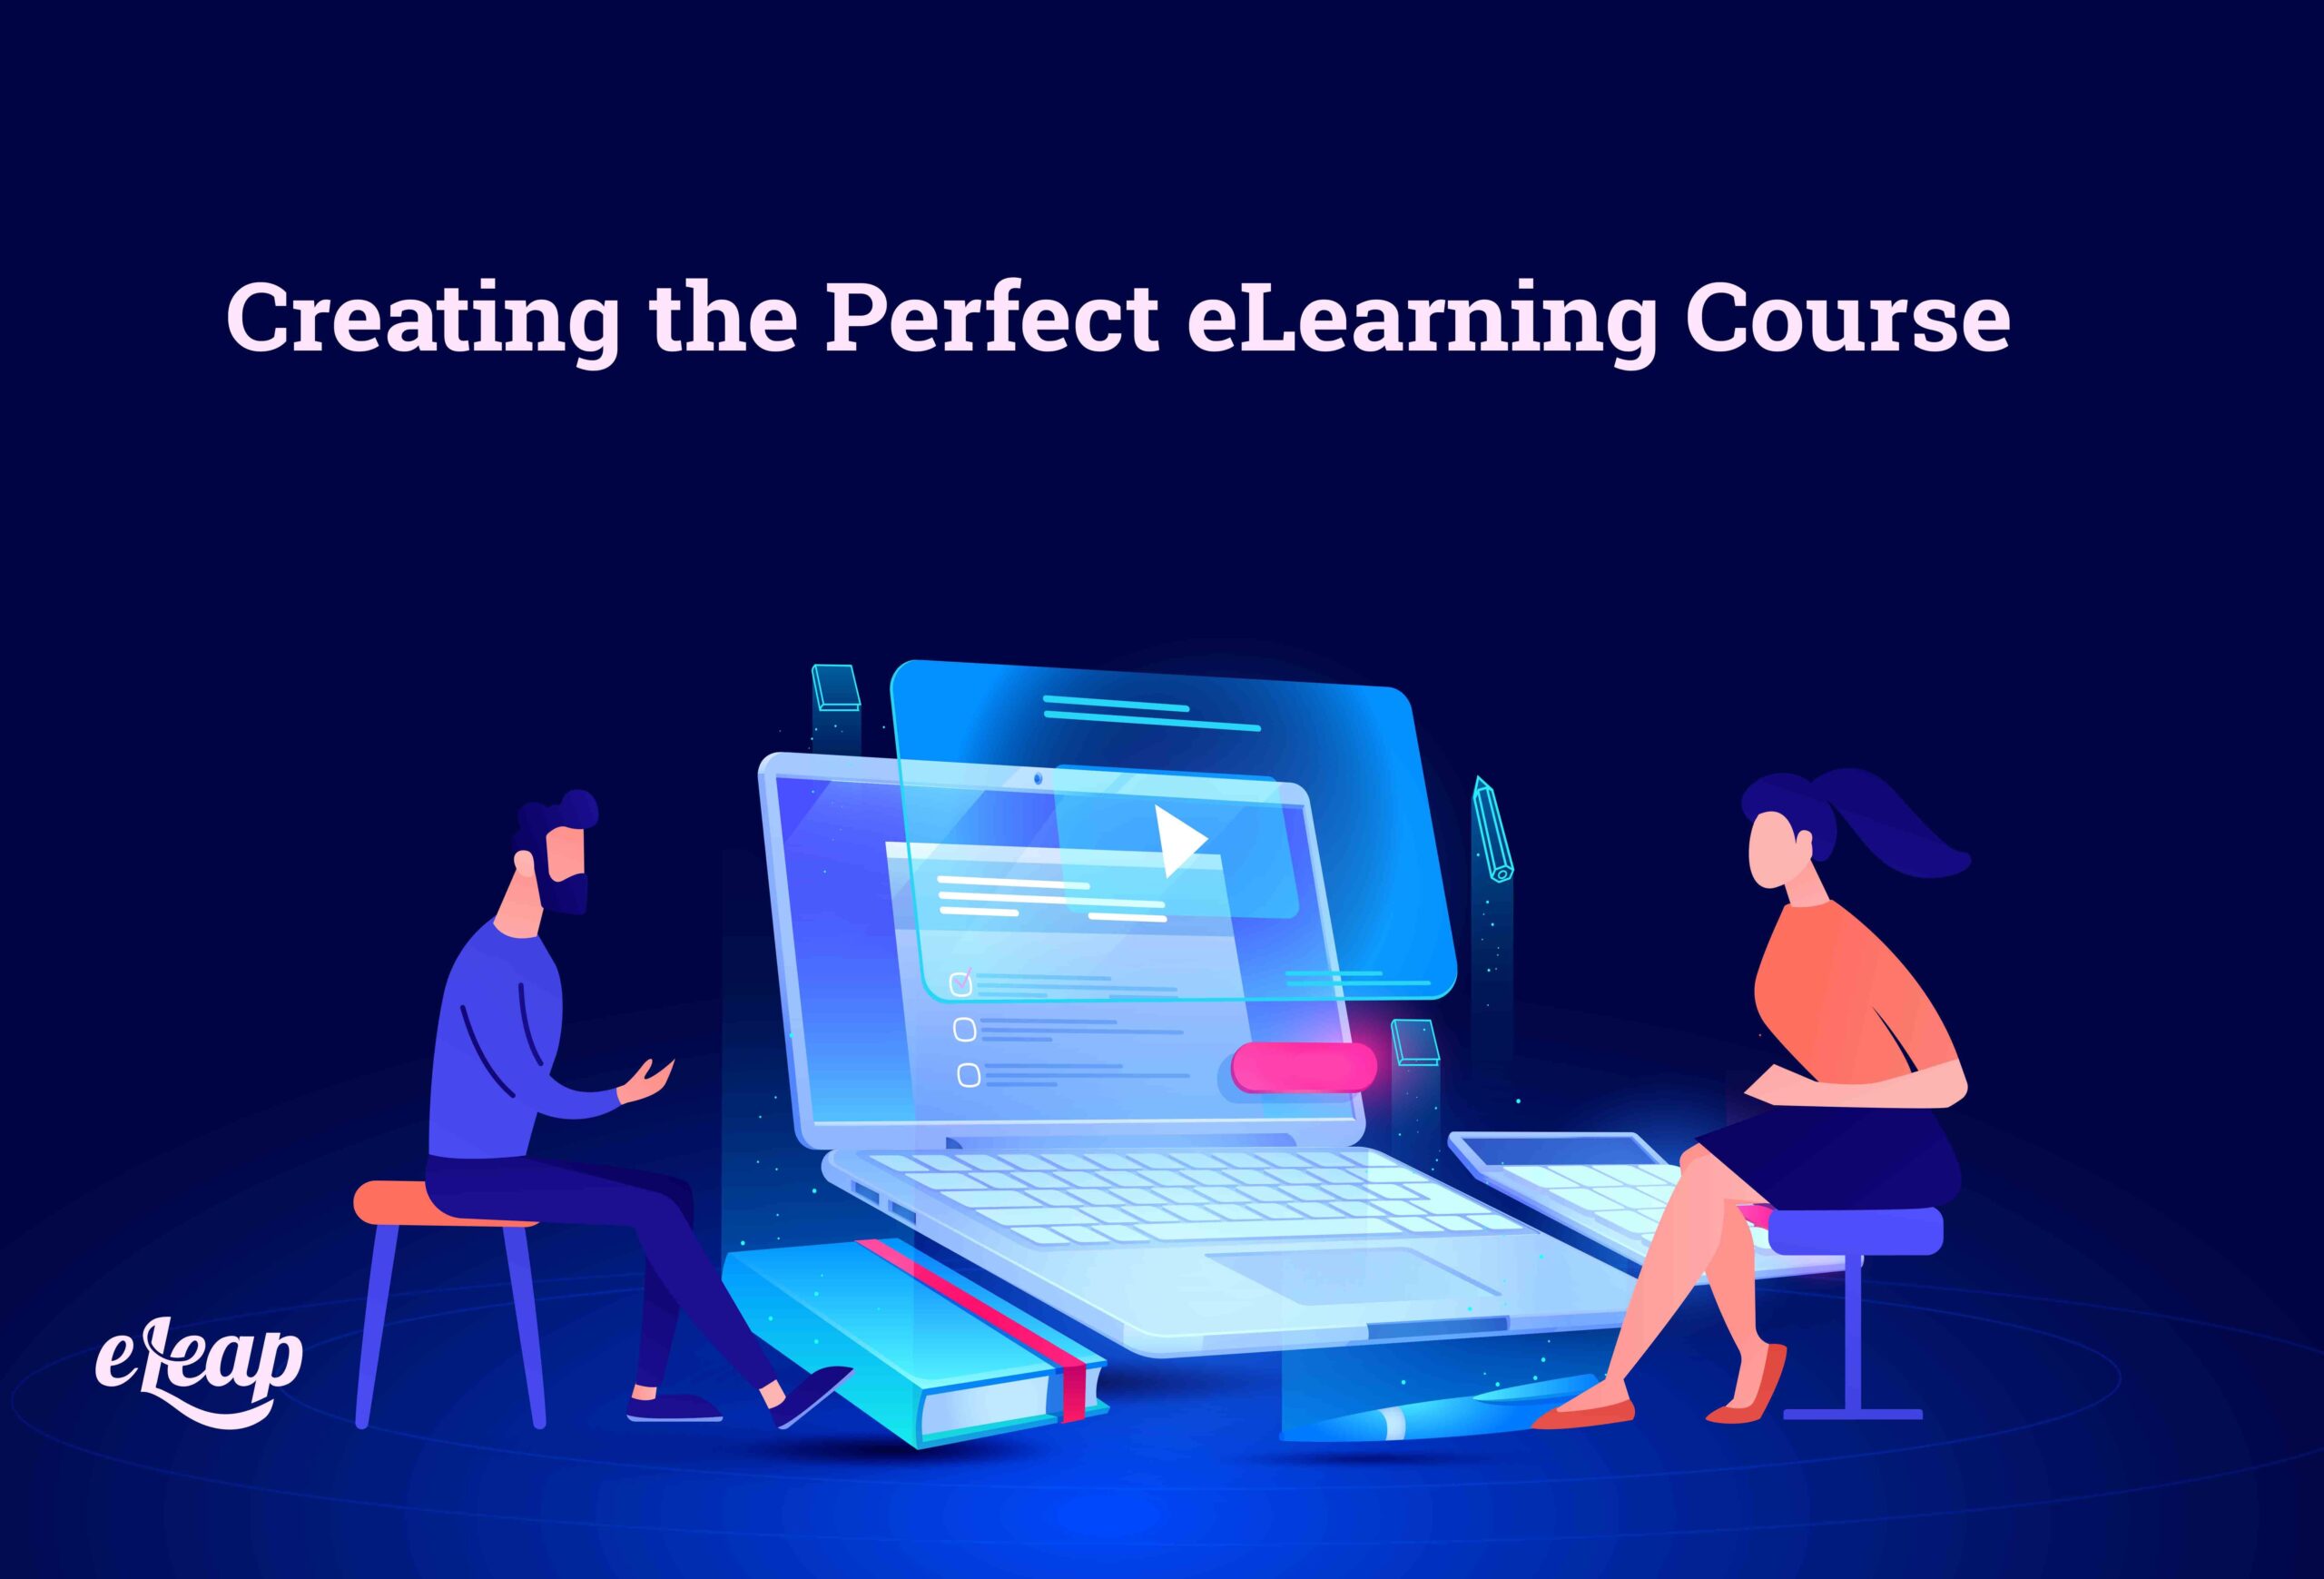 Creating the Perfect eLearning Course